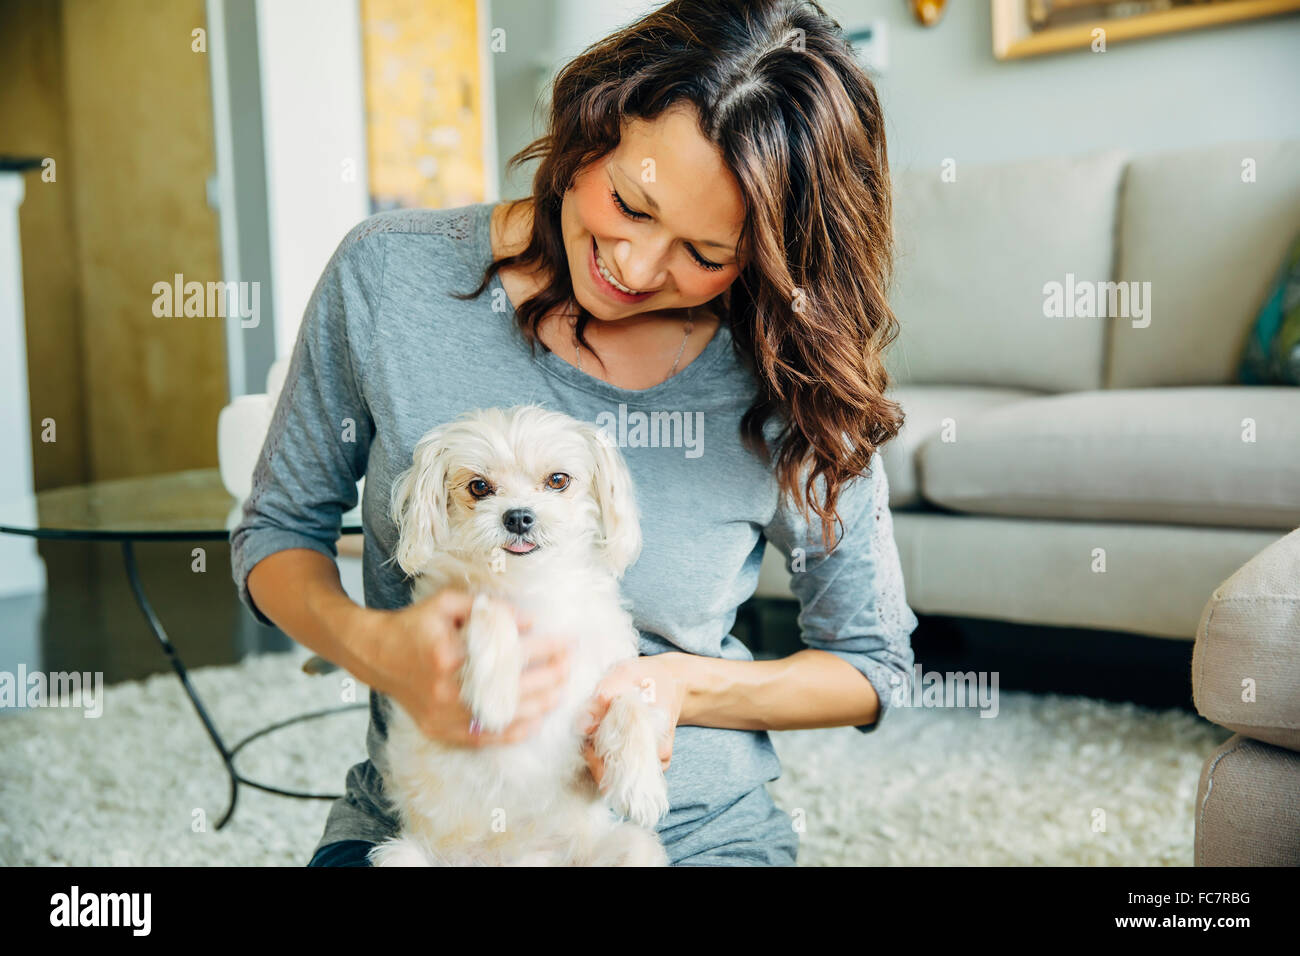 Caucasian woman petting dog in living room Stock Photo